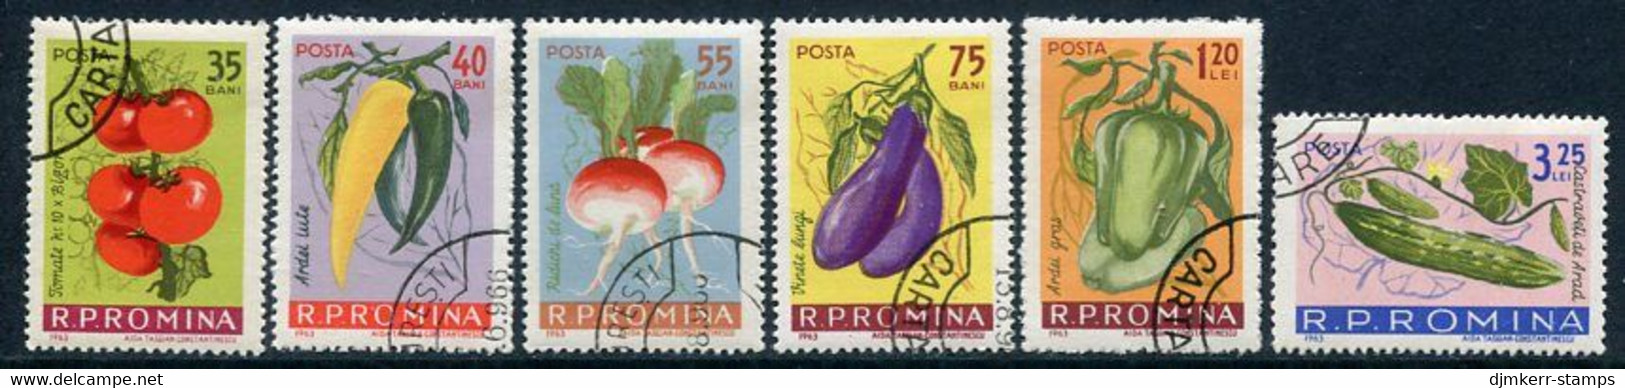 ROMANIA 1963  Vegetables Used.  Michel 2131-36 - Used Stamps